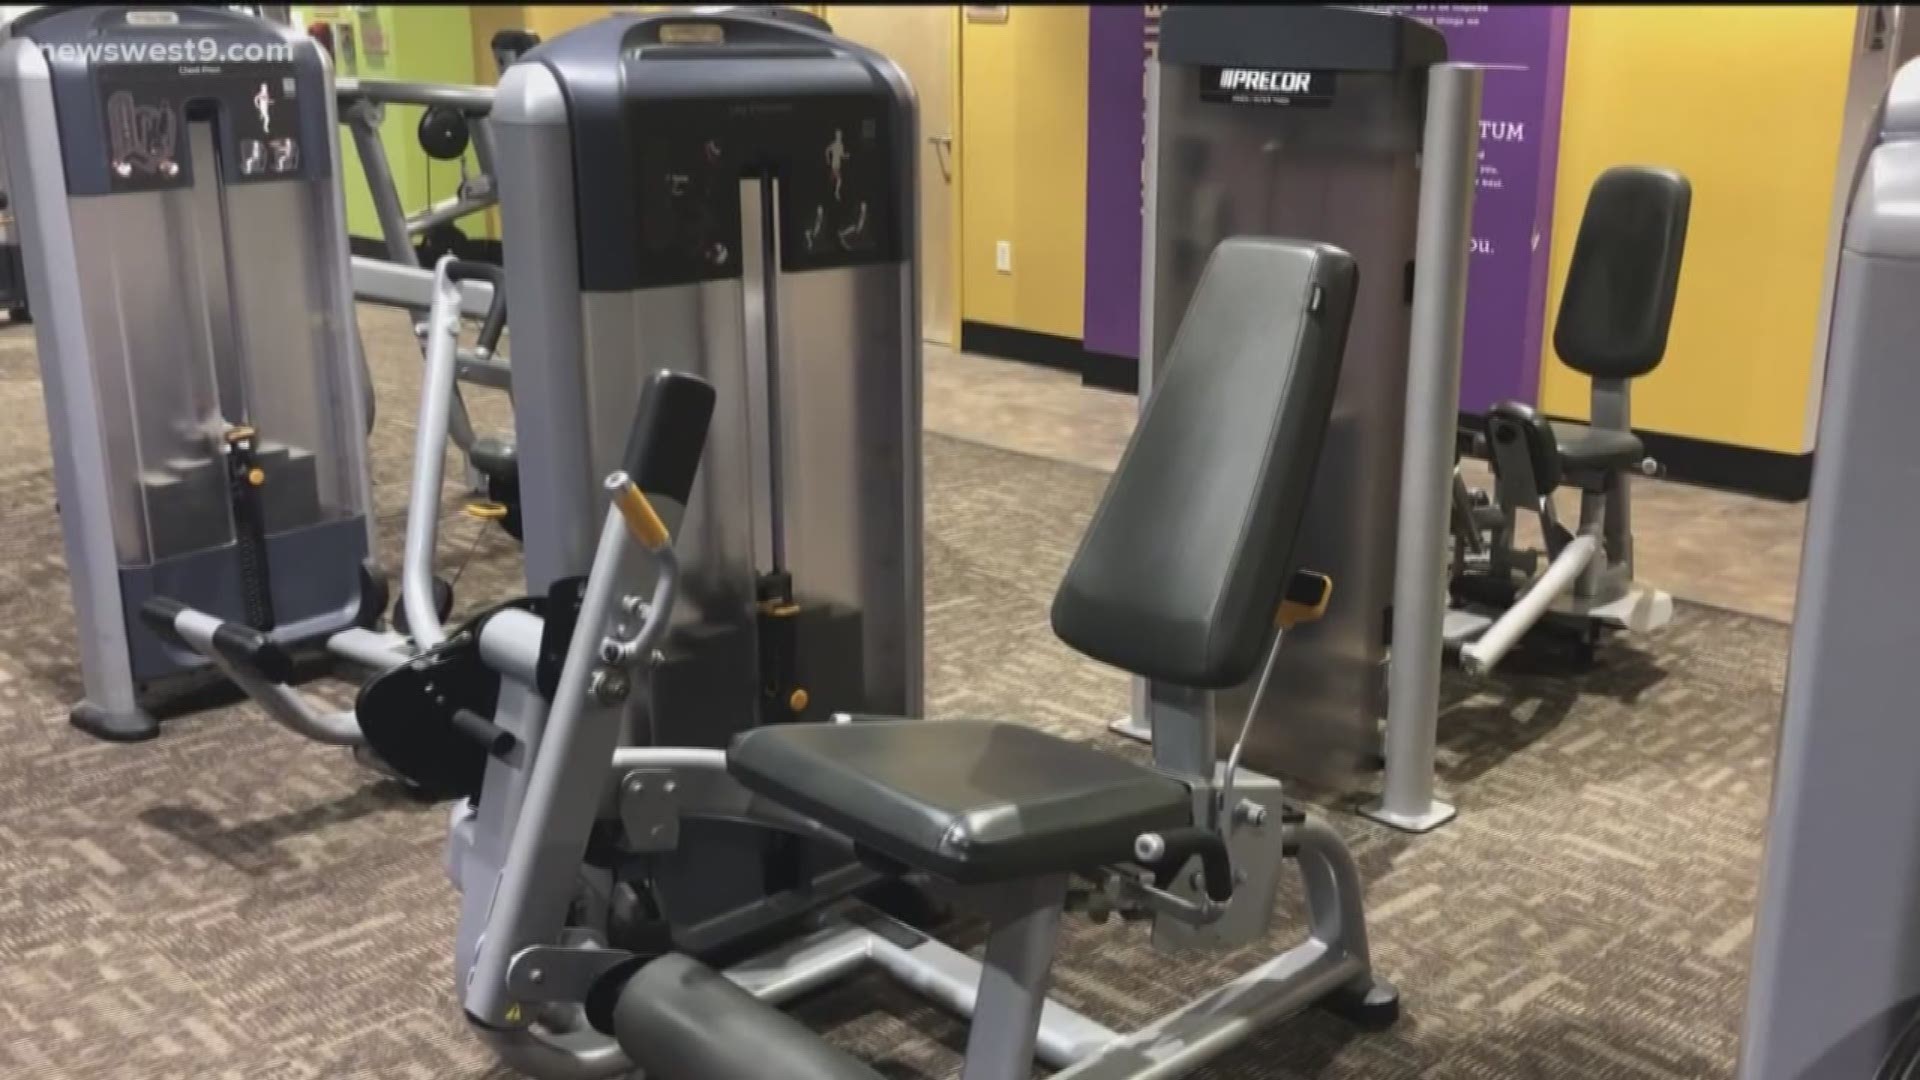 Anytime Fitness in Odessa plans to resume business as Texas begins to reopen on May 1.